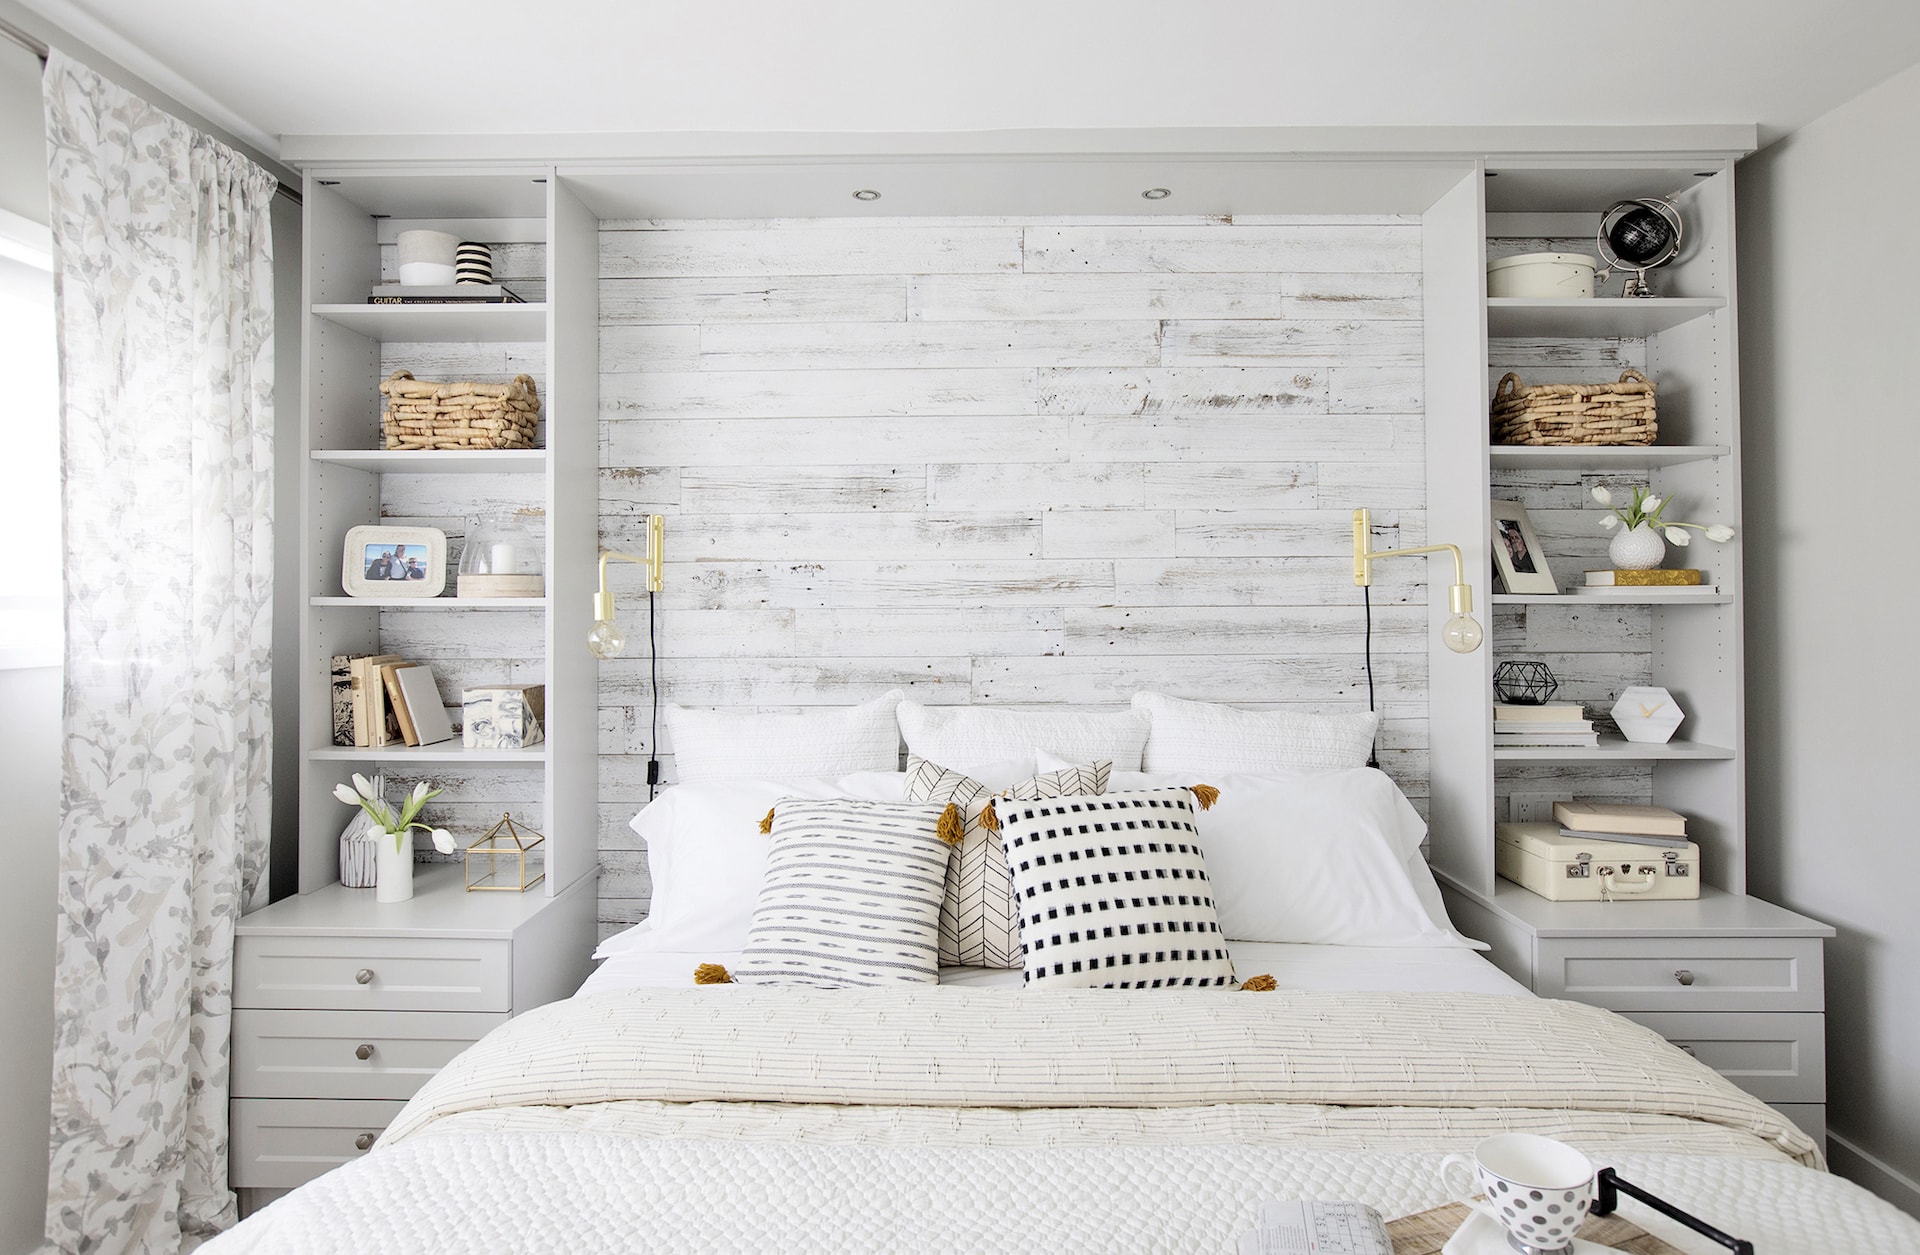 14 Easy Tips to Make Small Rooms Look and Feel Bigger